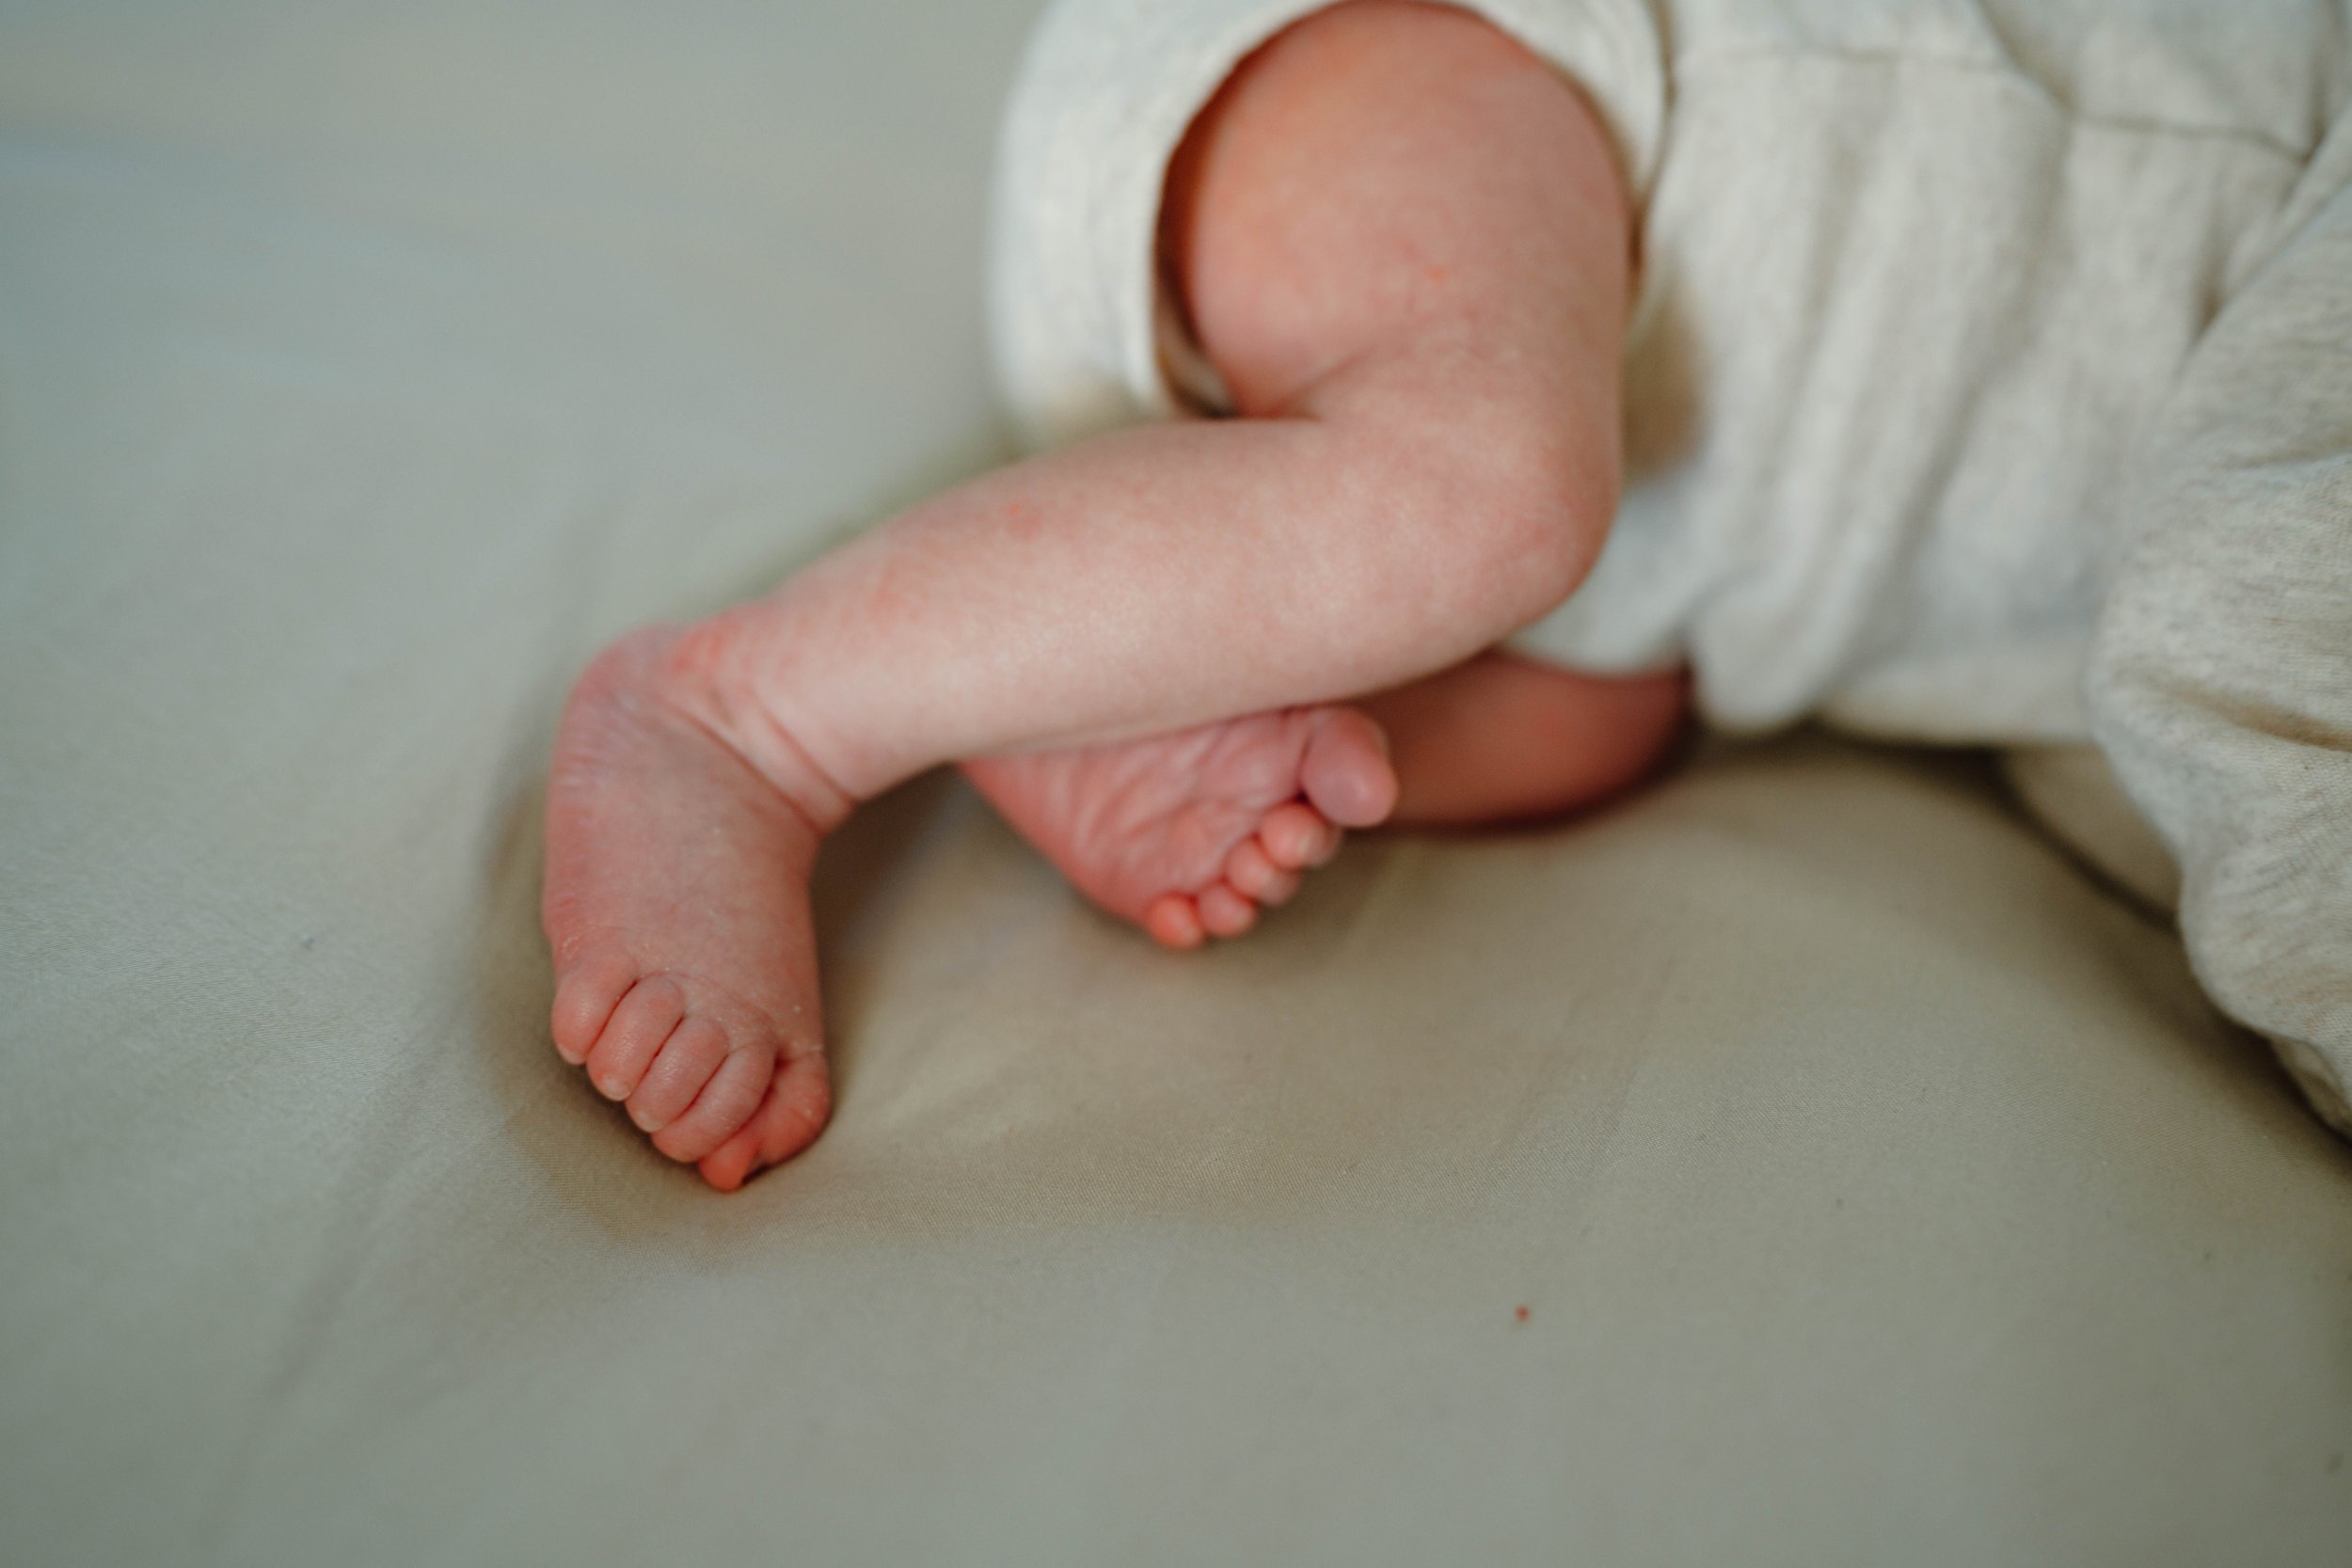 A close-up of the baby's legs, feet, and toes